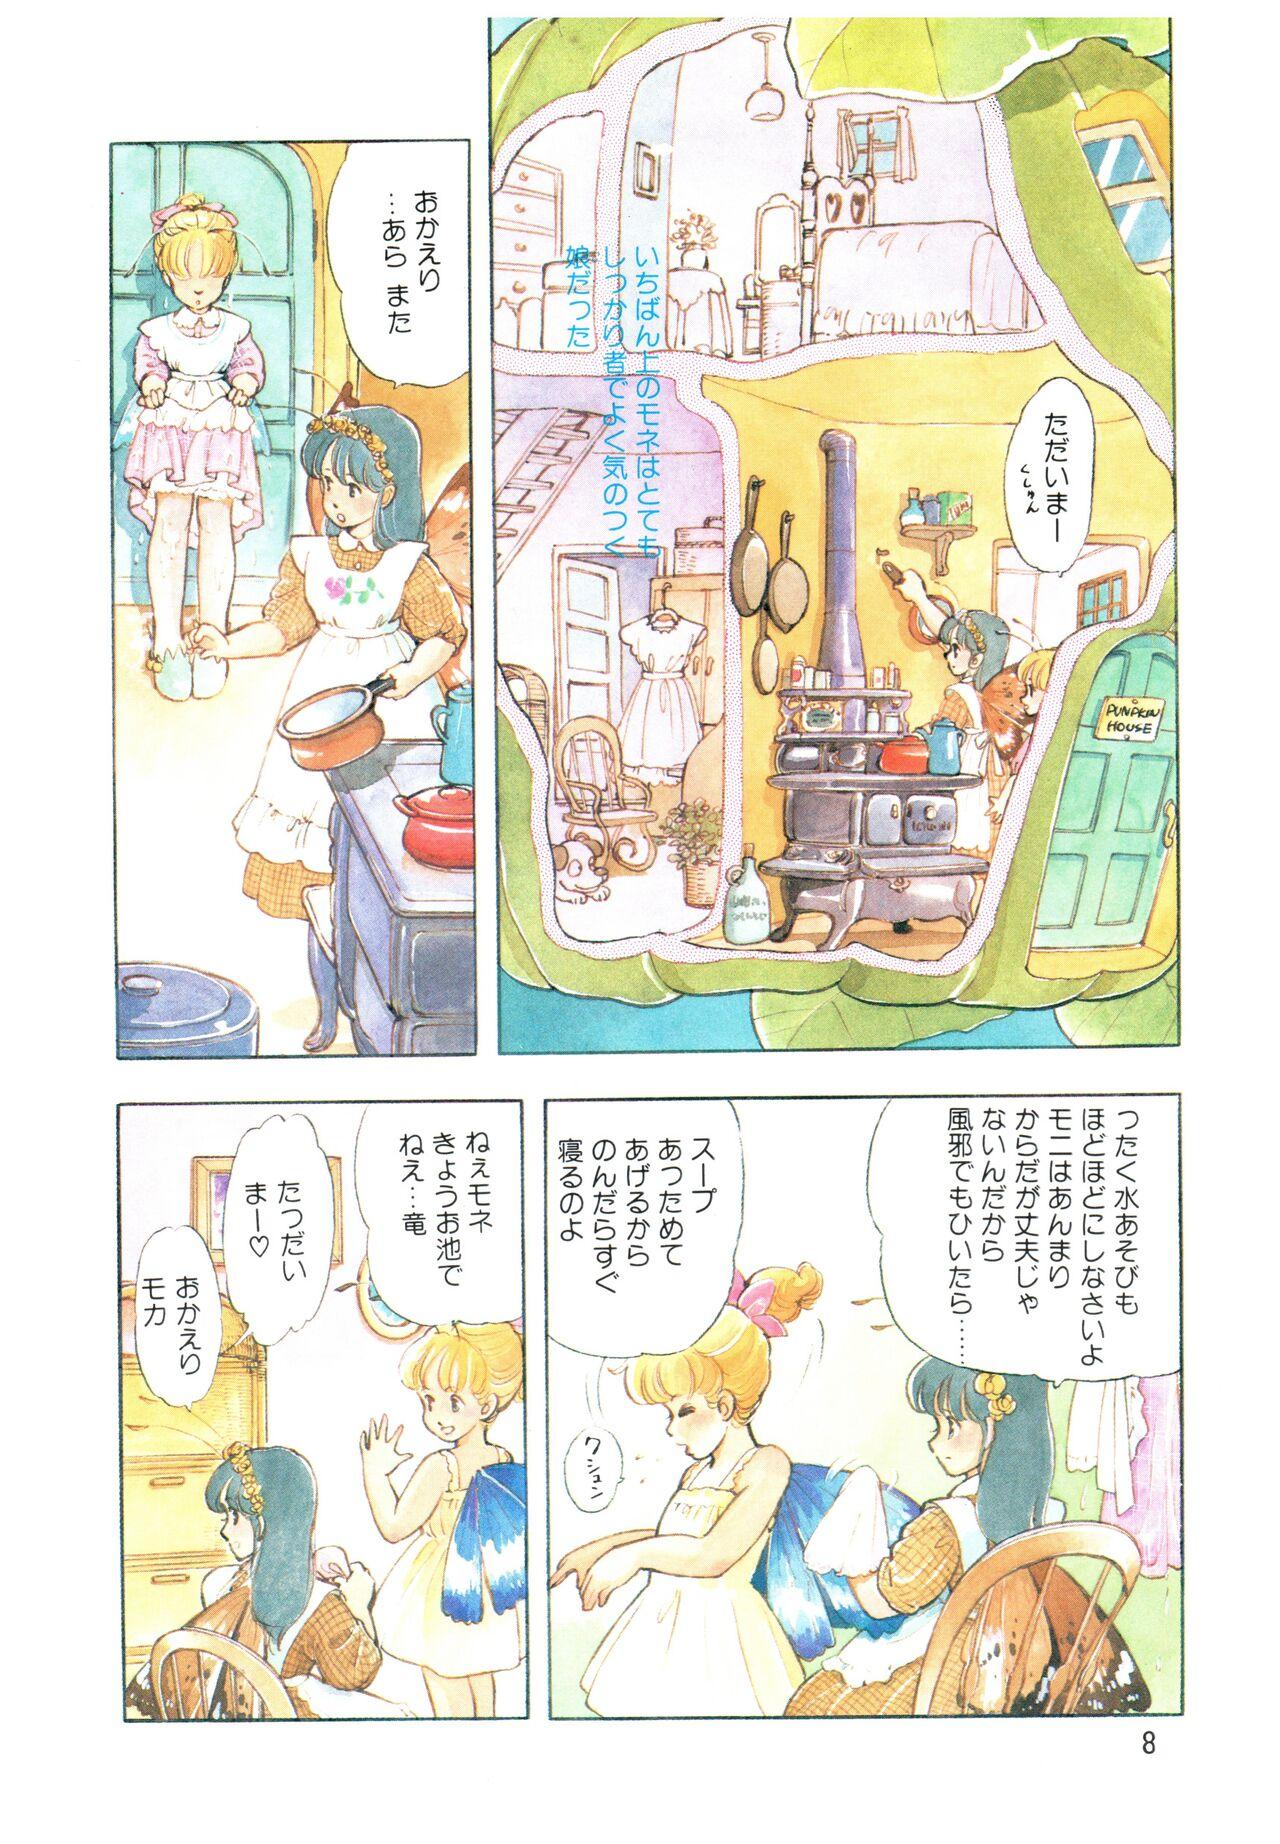 Cousin Manga Burikko 1984-05 extra number Peppermint★Gallery Caseiro - Page 6